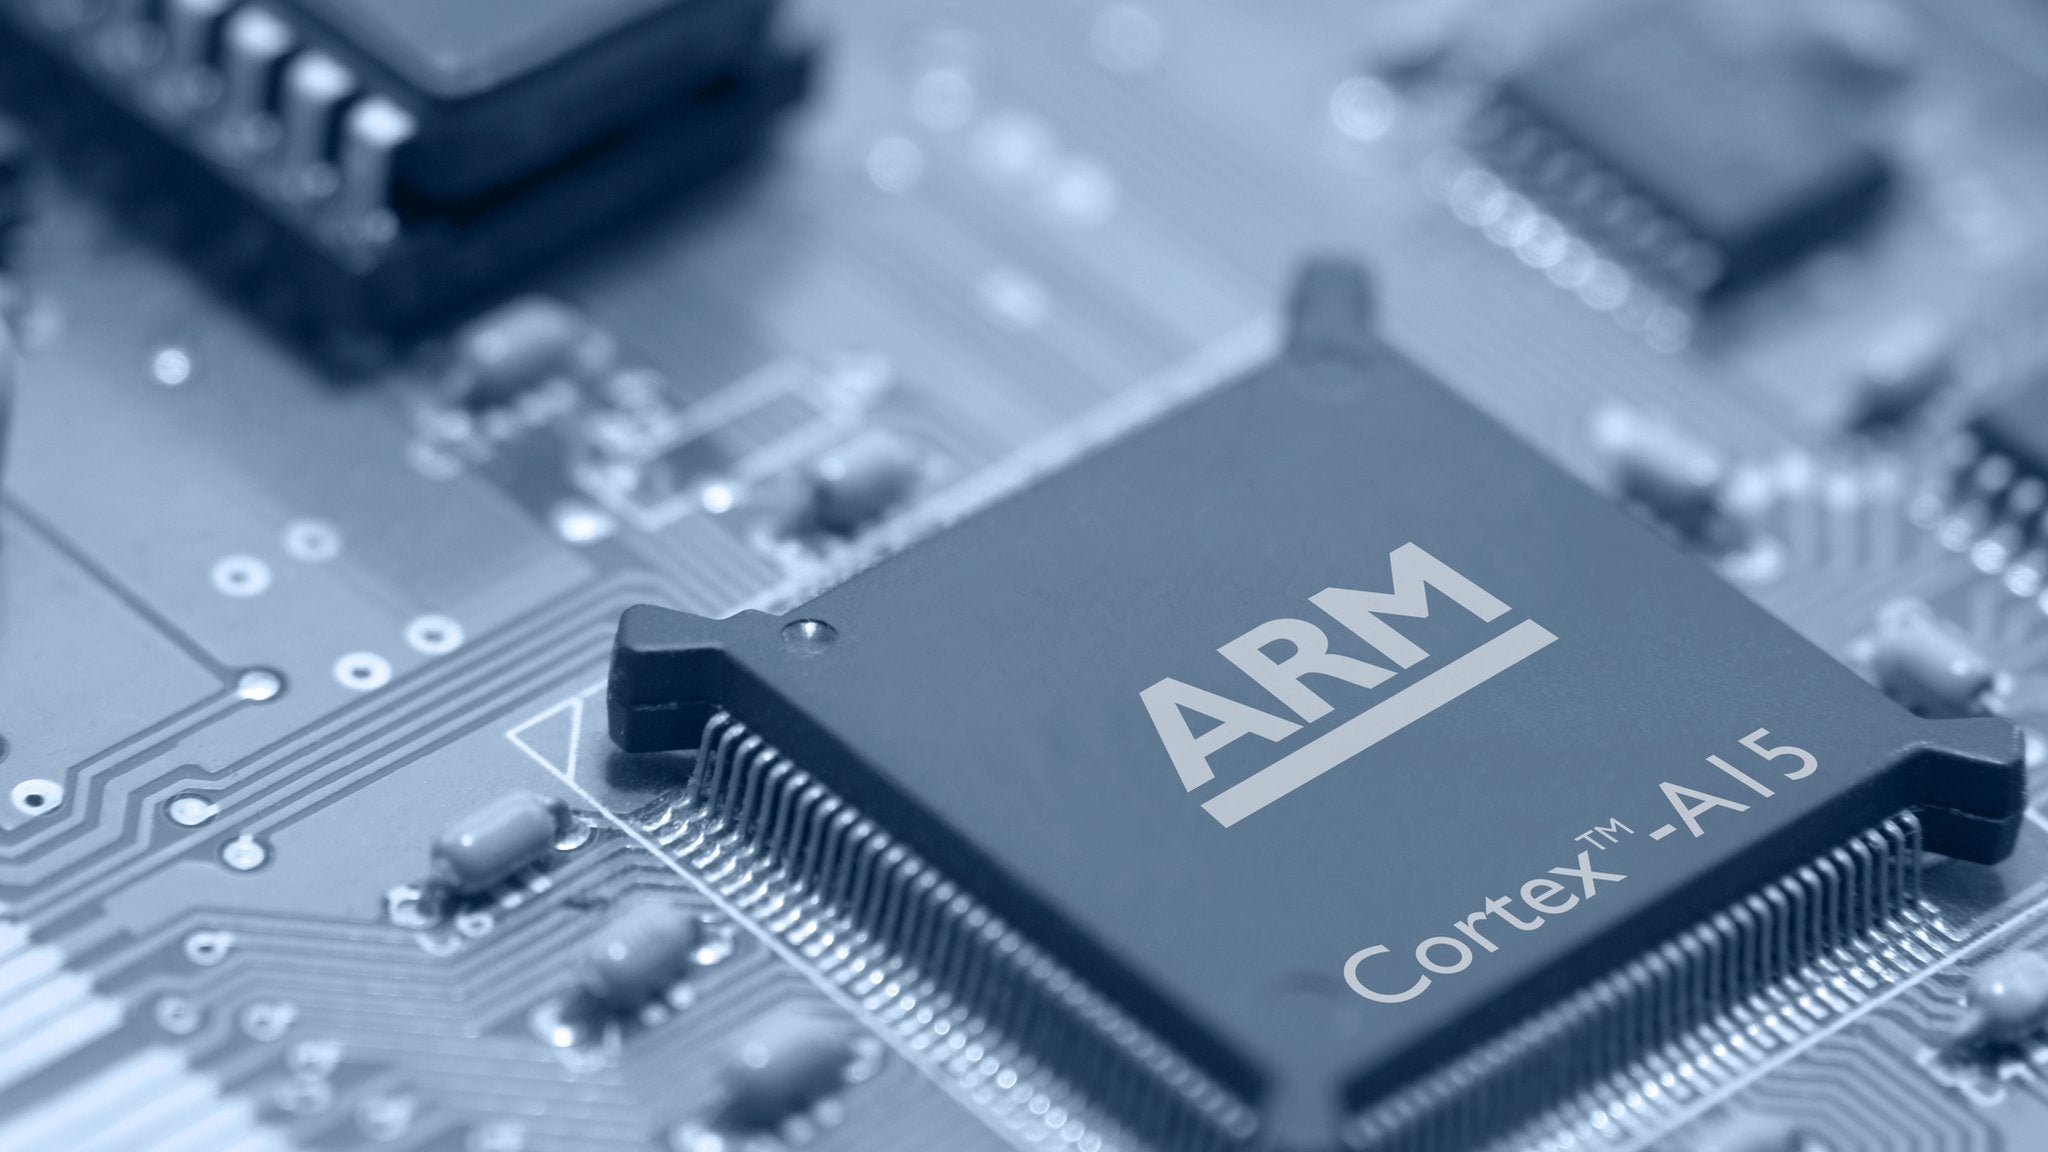 Image for Nvidia's acquisition of Arm cancelled due to "significant regulatory challenges"